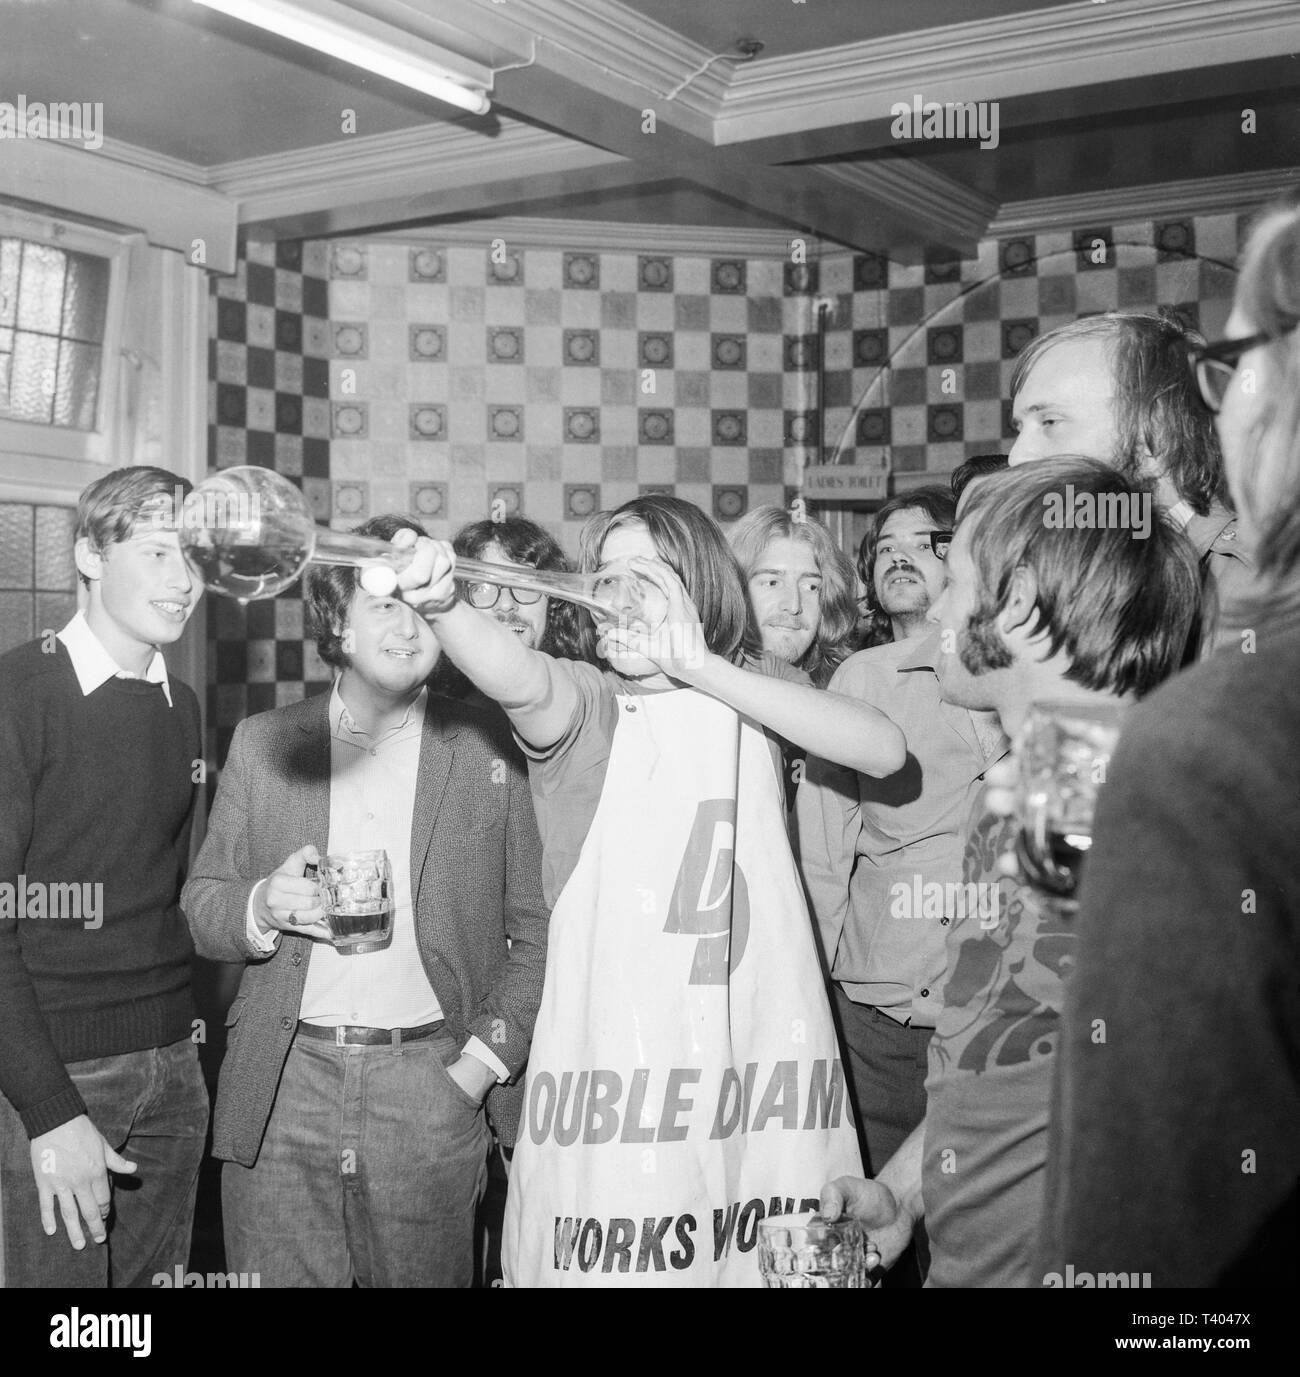 A young man drinking a Yard Of Ale in an English pour during the 1970s.A yard of ale or yard glass is a very tall beer glass used for drinking around 2 1⁄2 imperial pints (1.4 L) of beer, depending upon the diameter. The glass is approximately 1 yard (90 cm) long, shaped with a bulb at the bottom, and a widening shaft, which constitutes most of the height. The glass most likely originated in 17th-century England, where the glass was known also as a 'long glass', a 'Cambridge yard (glass)' and an 'ell glass'. It is associated by legend with stagecoach drivers. Stock Photo